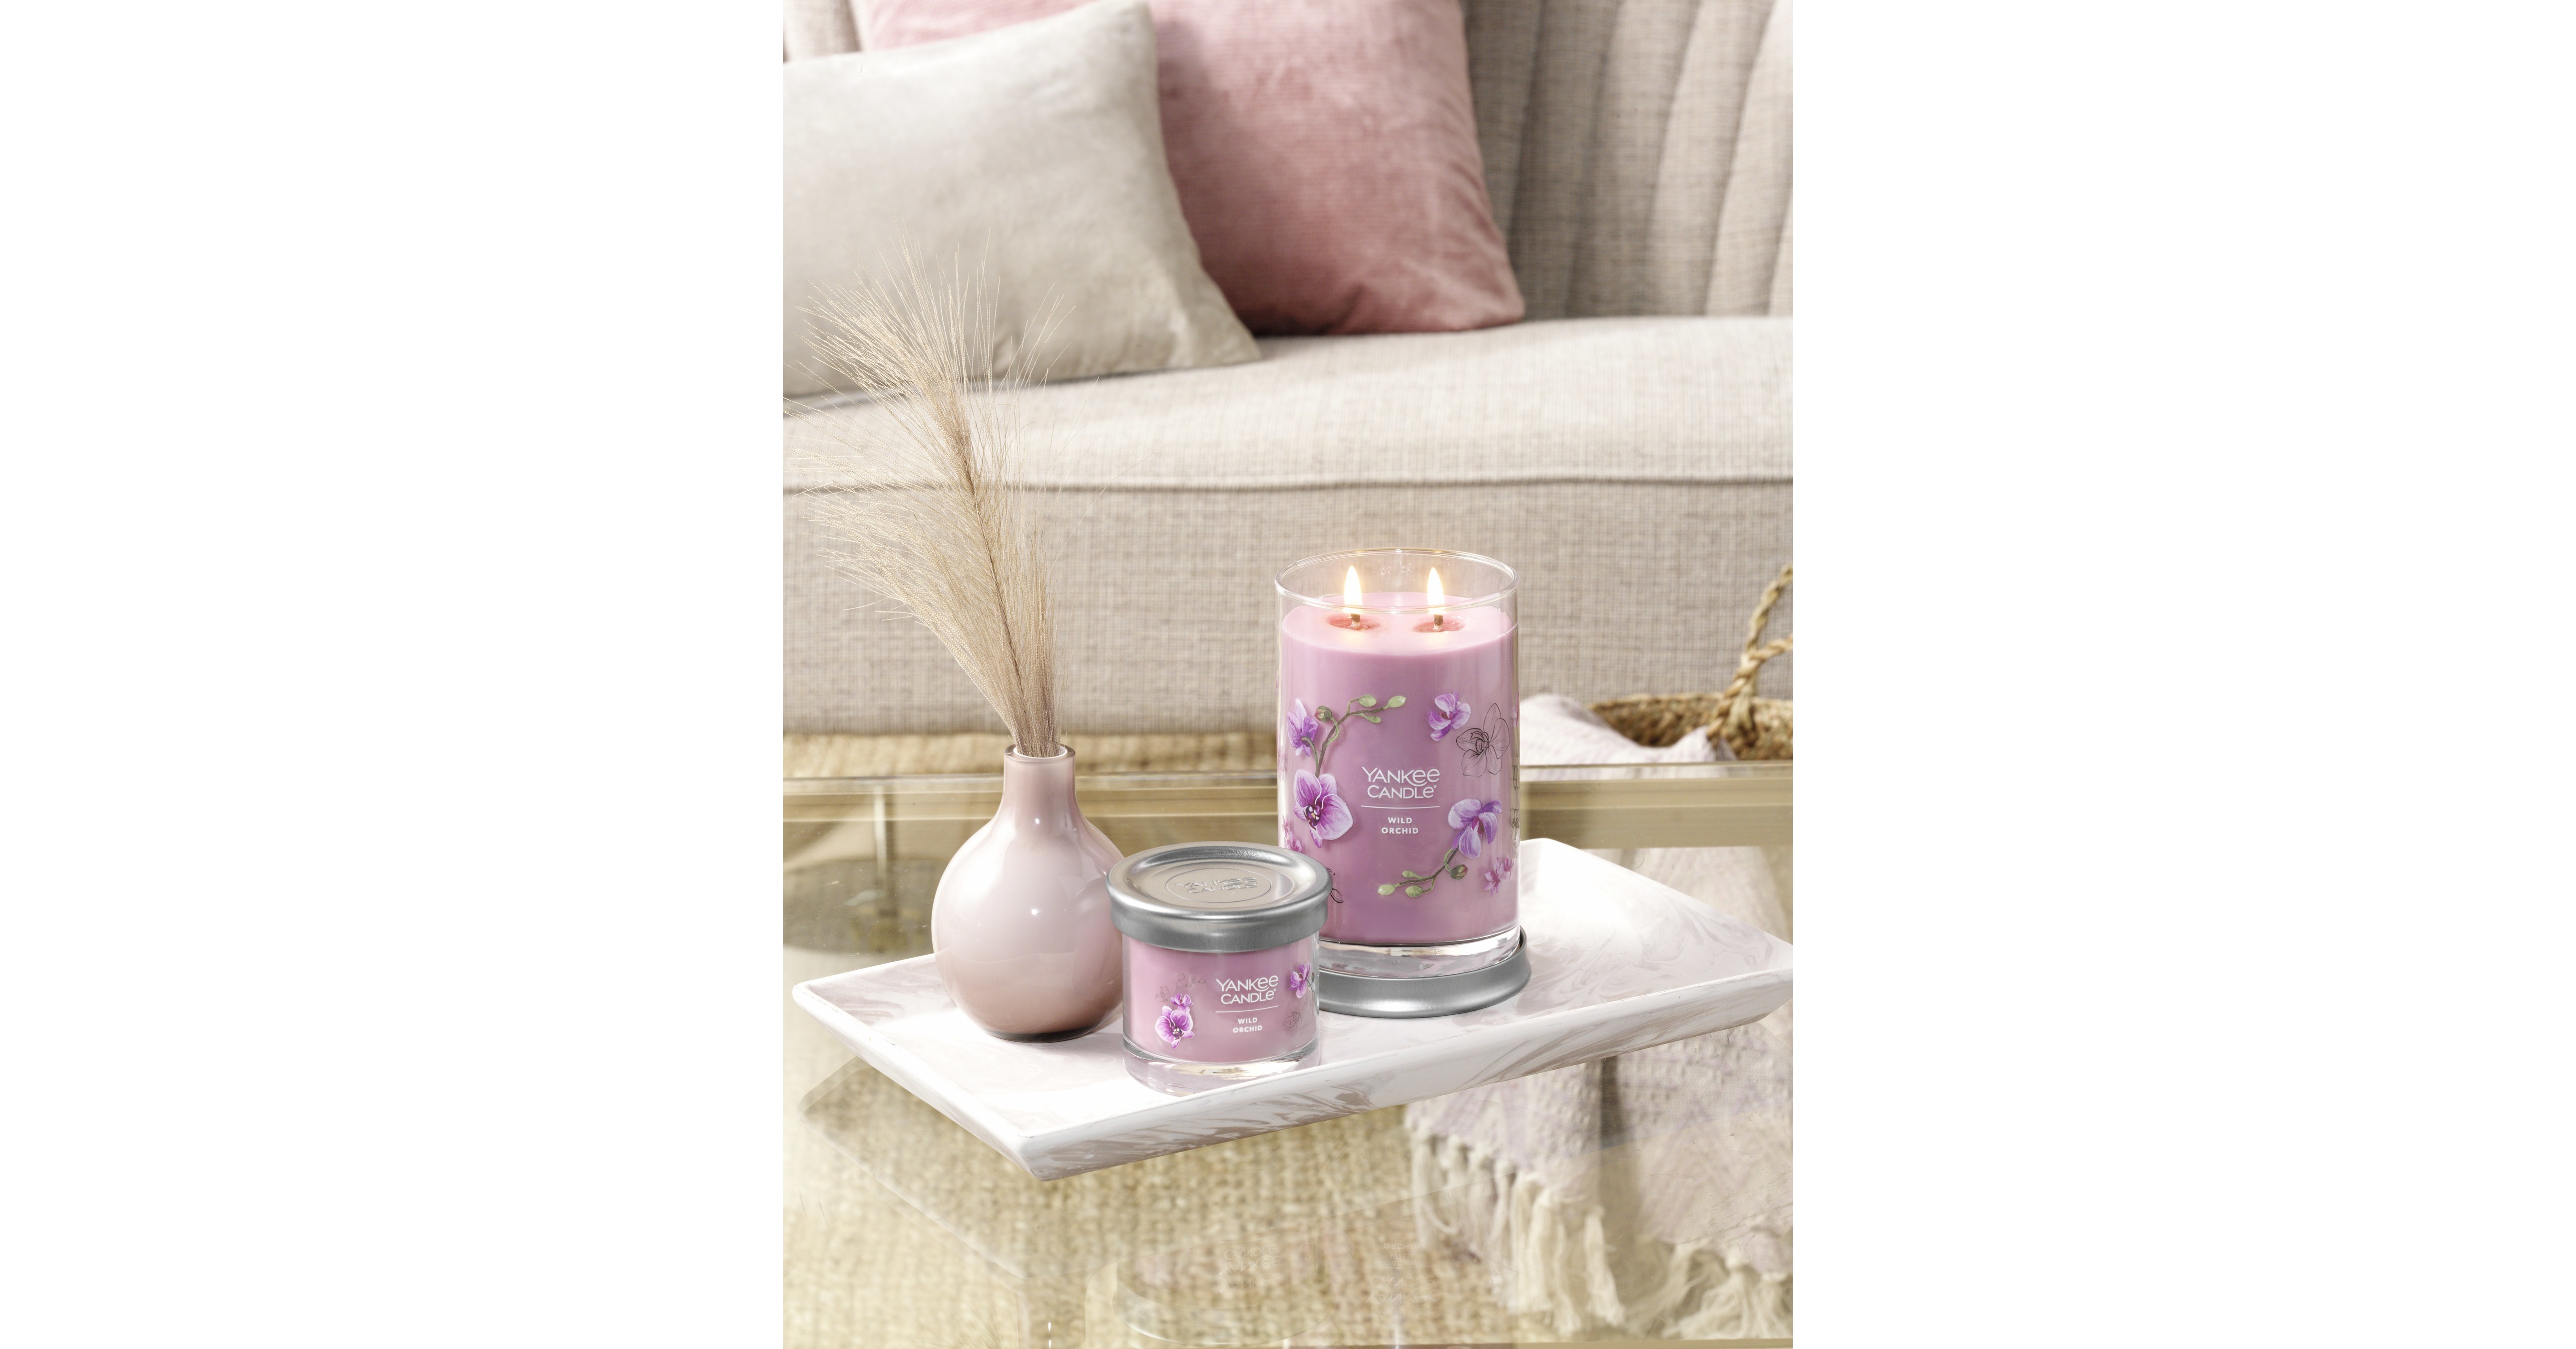 Yankee Candle Signature - Un nuovo Look